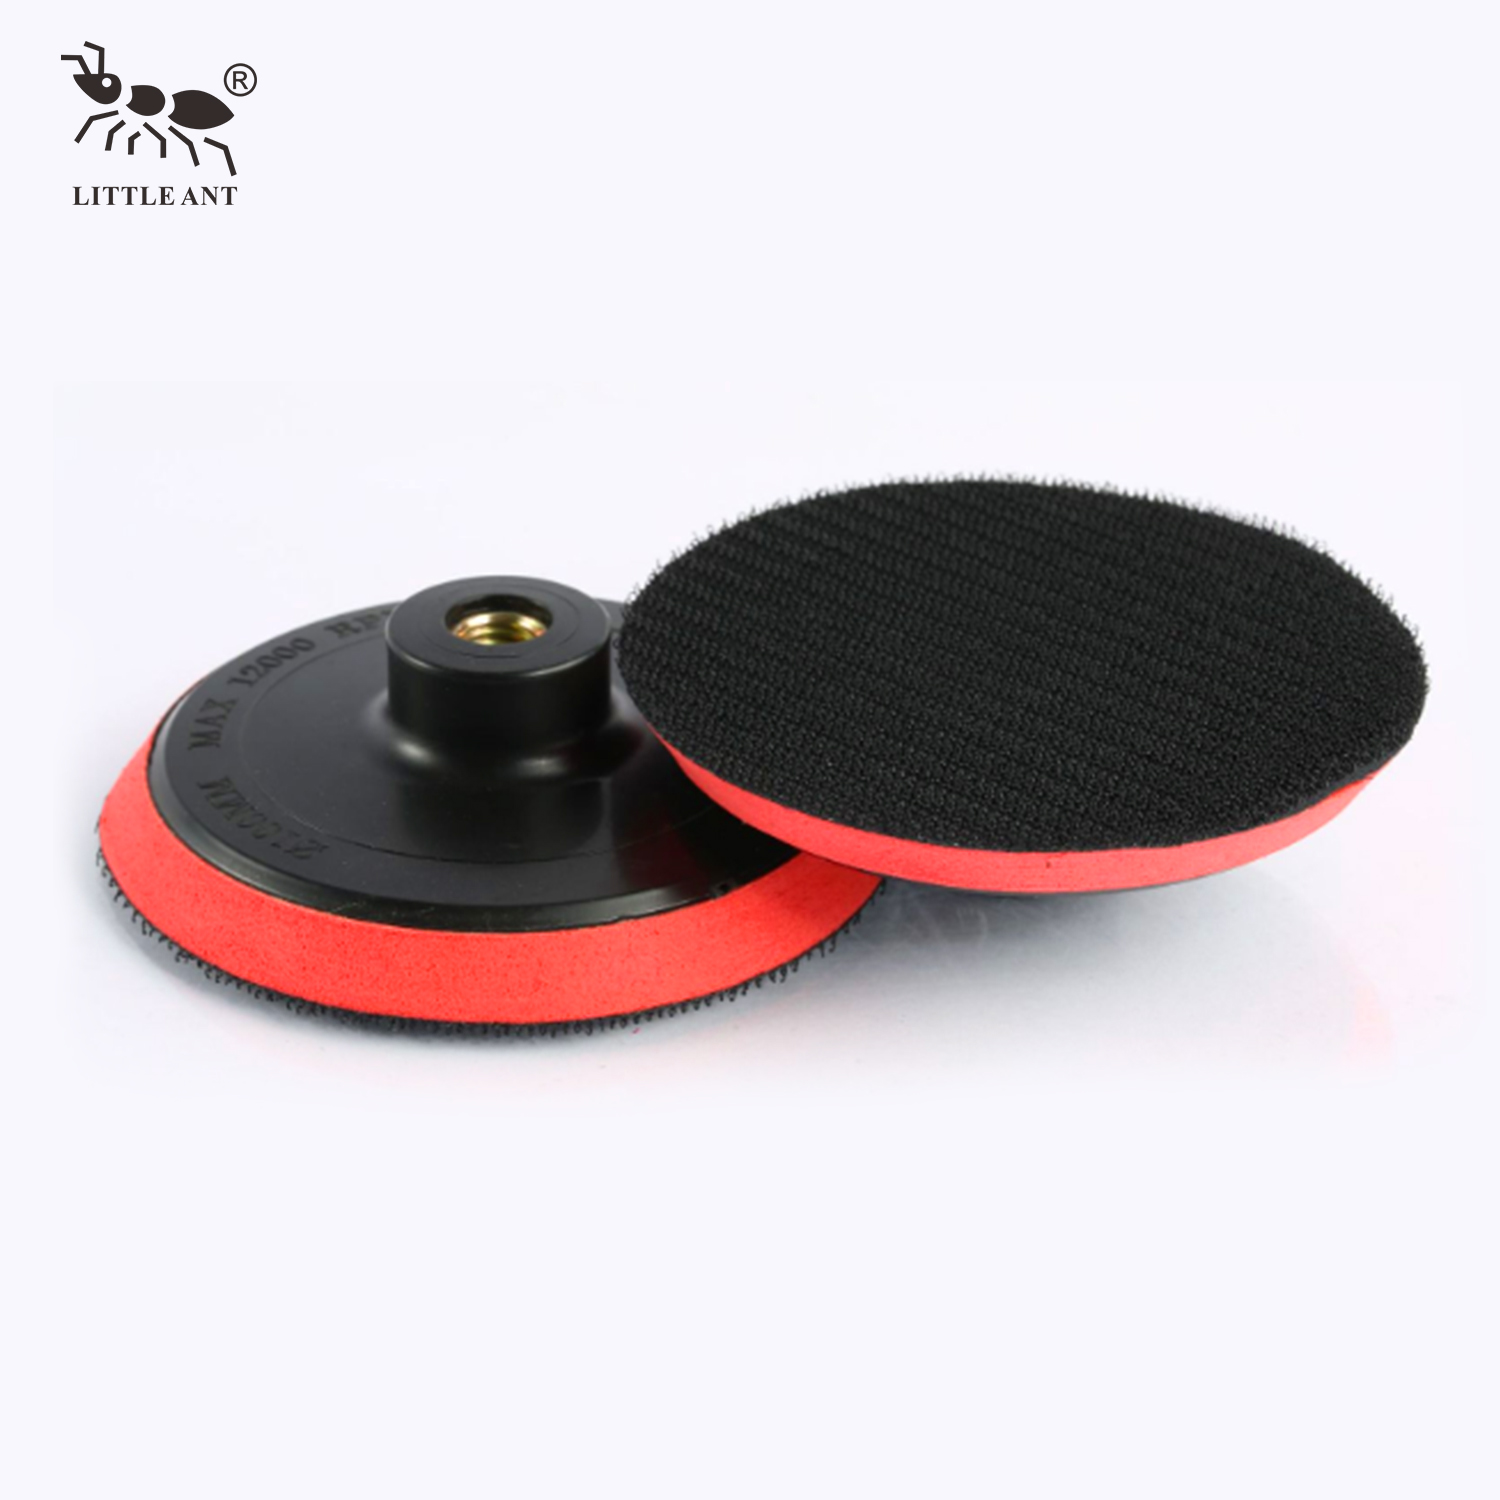 ∮100mm Backer Pad Holder Connecter Double Paste